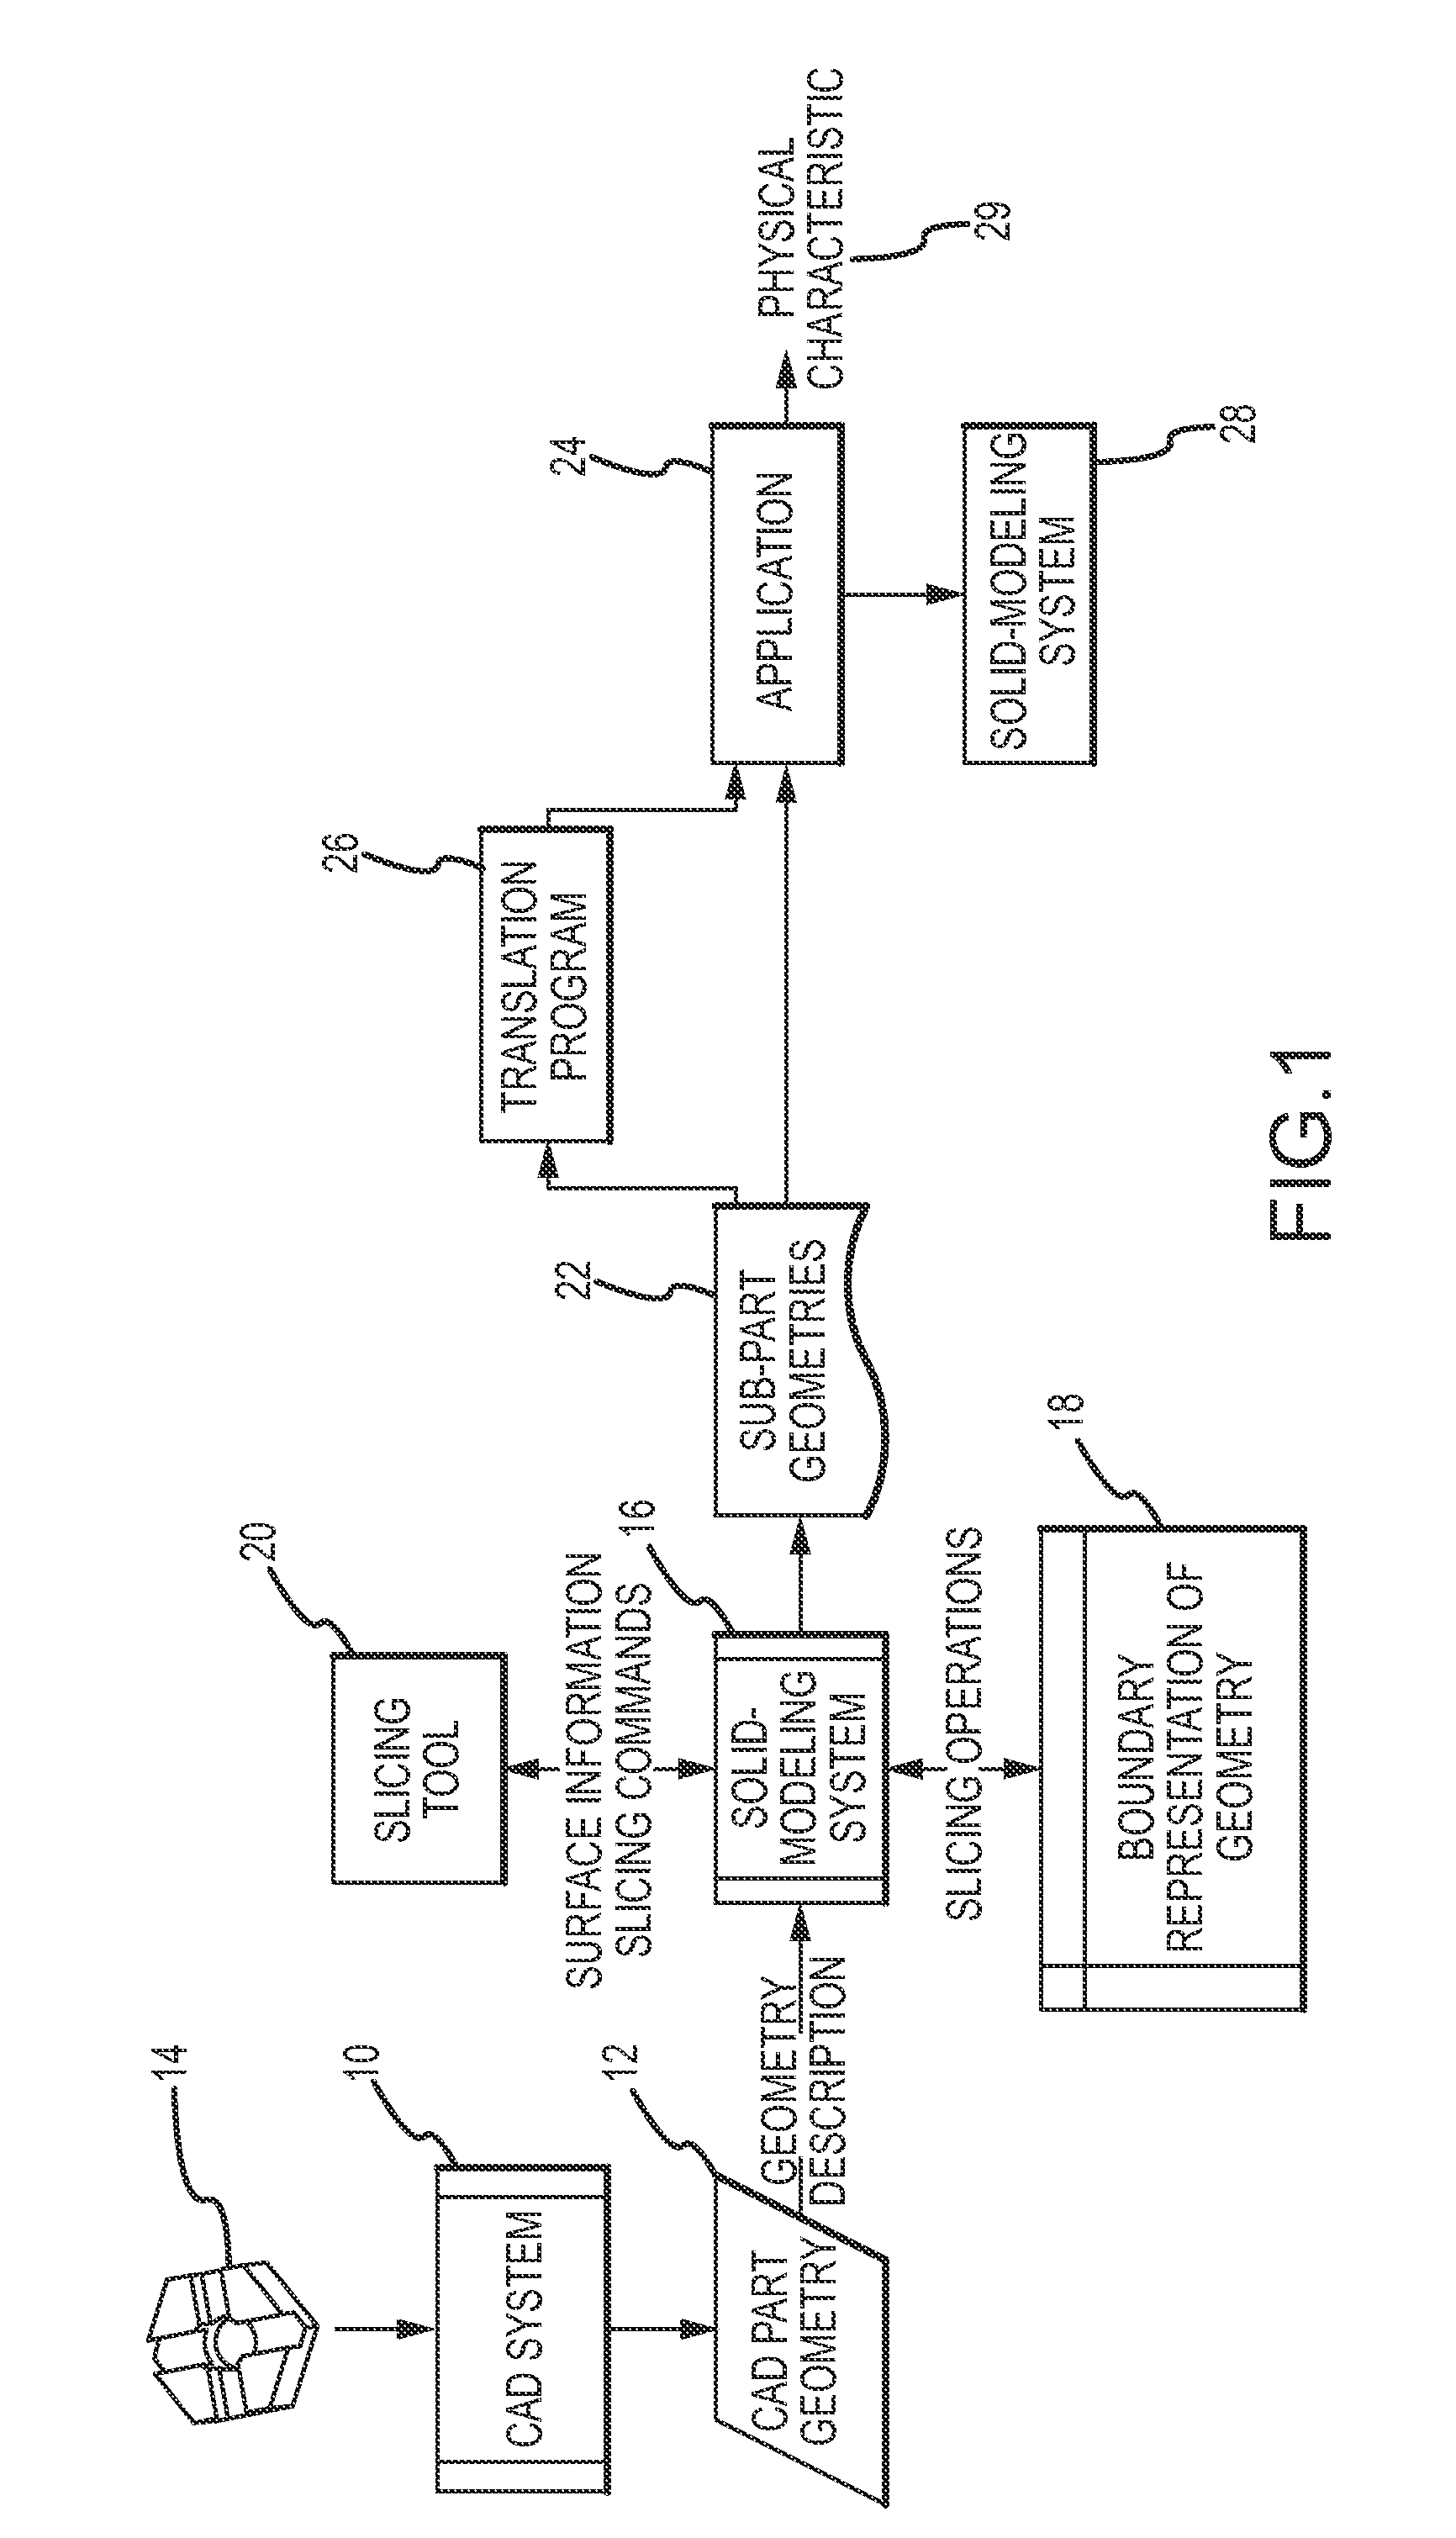 System and method for partitioning CAD models of parts into simpler sub-parts for analysis of physical characteristics of the parts